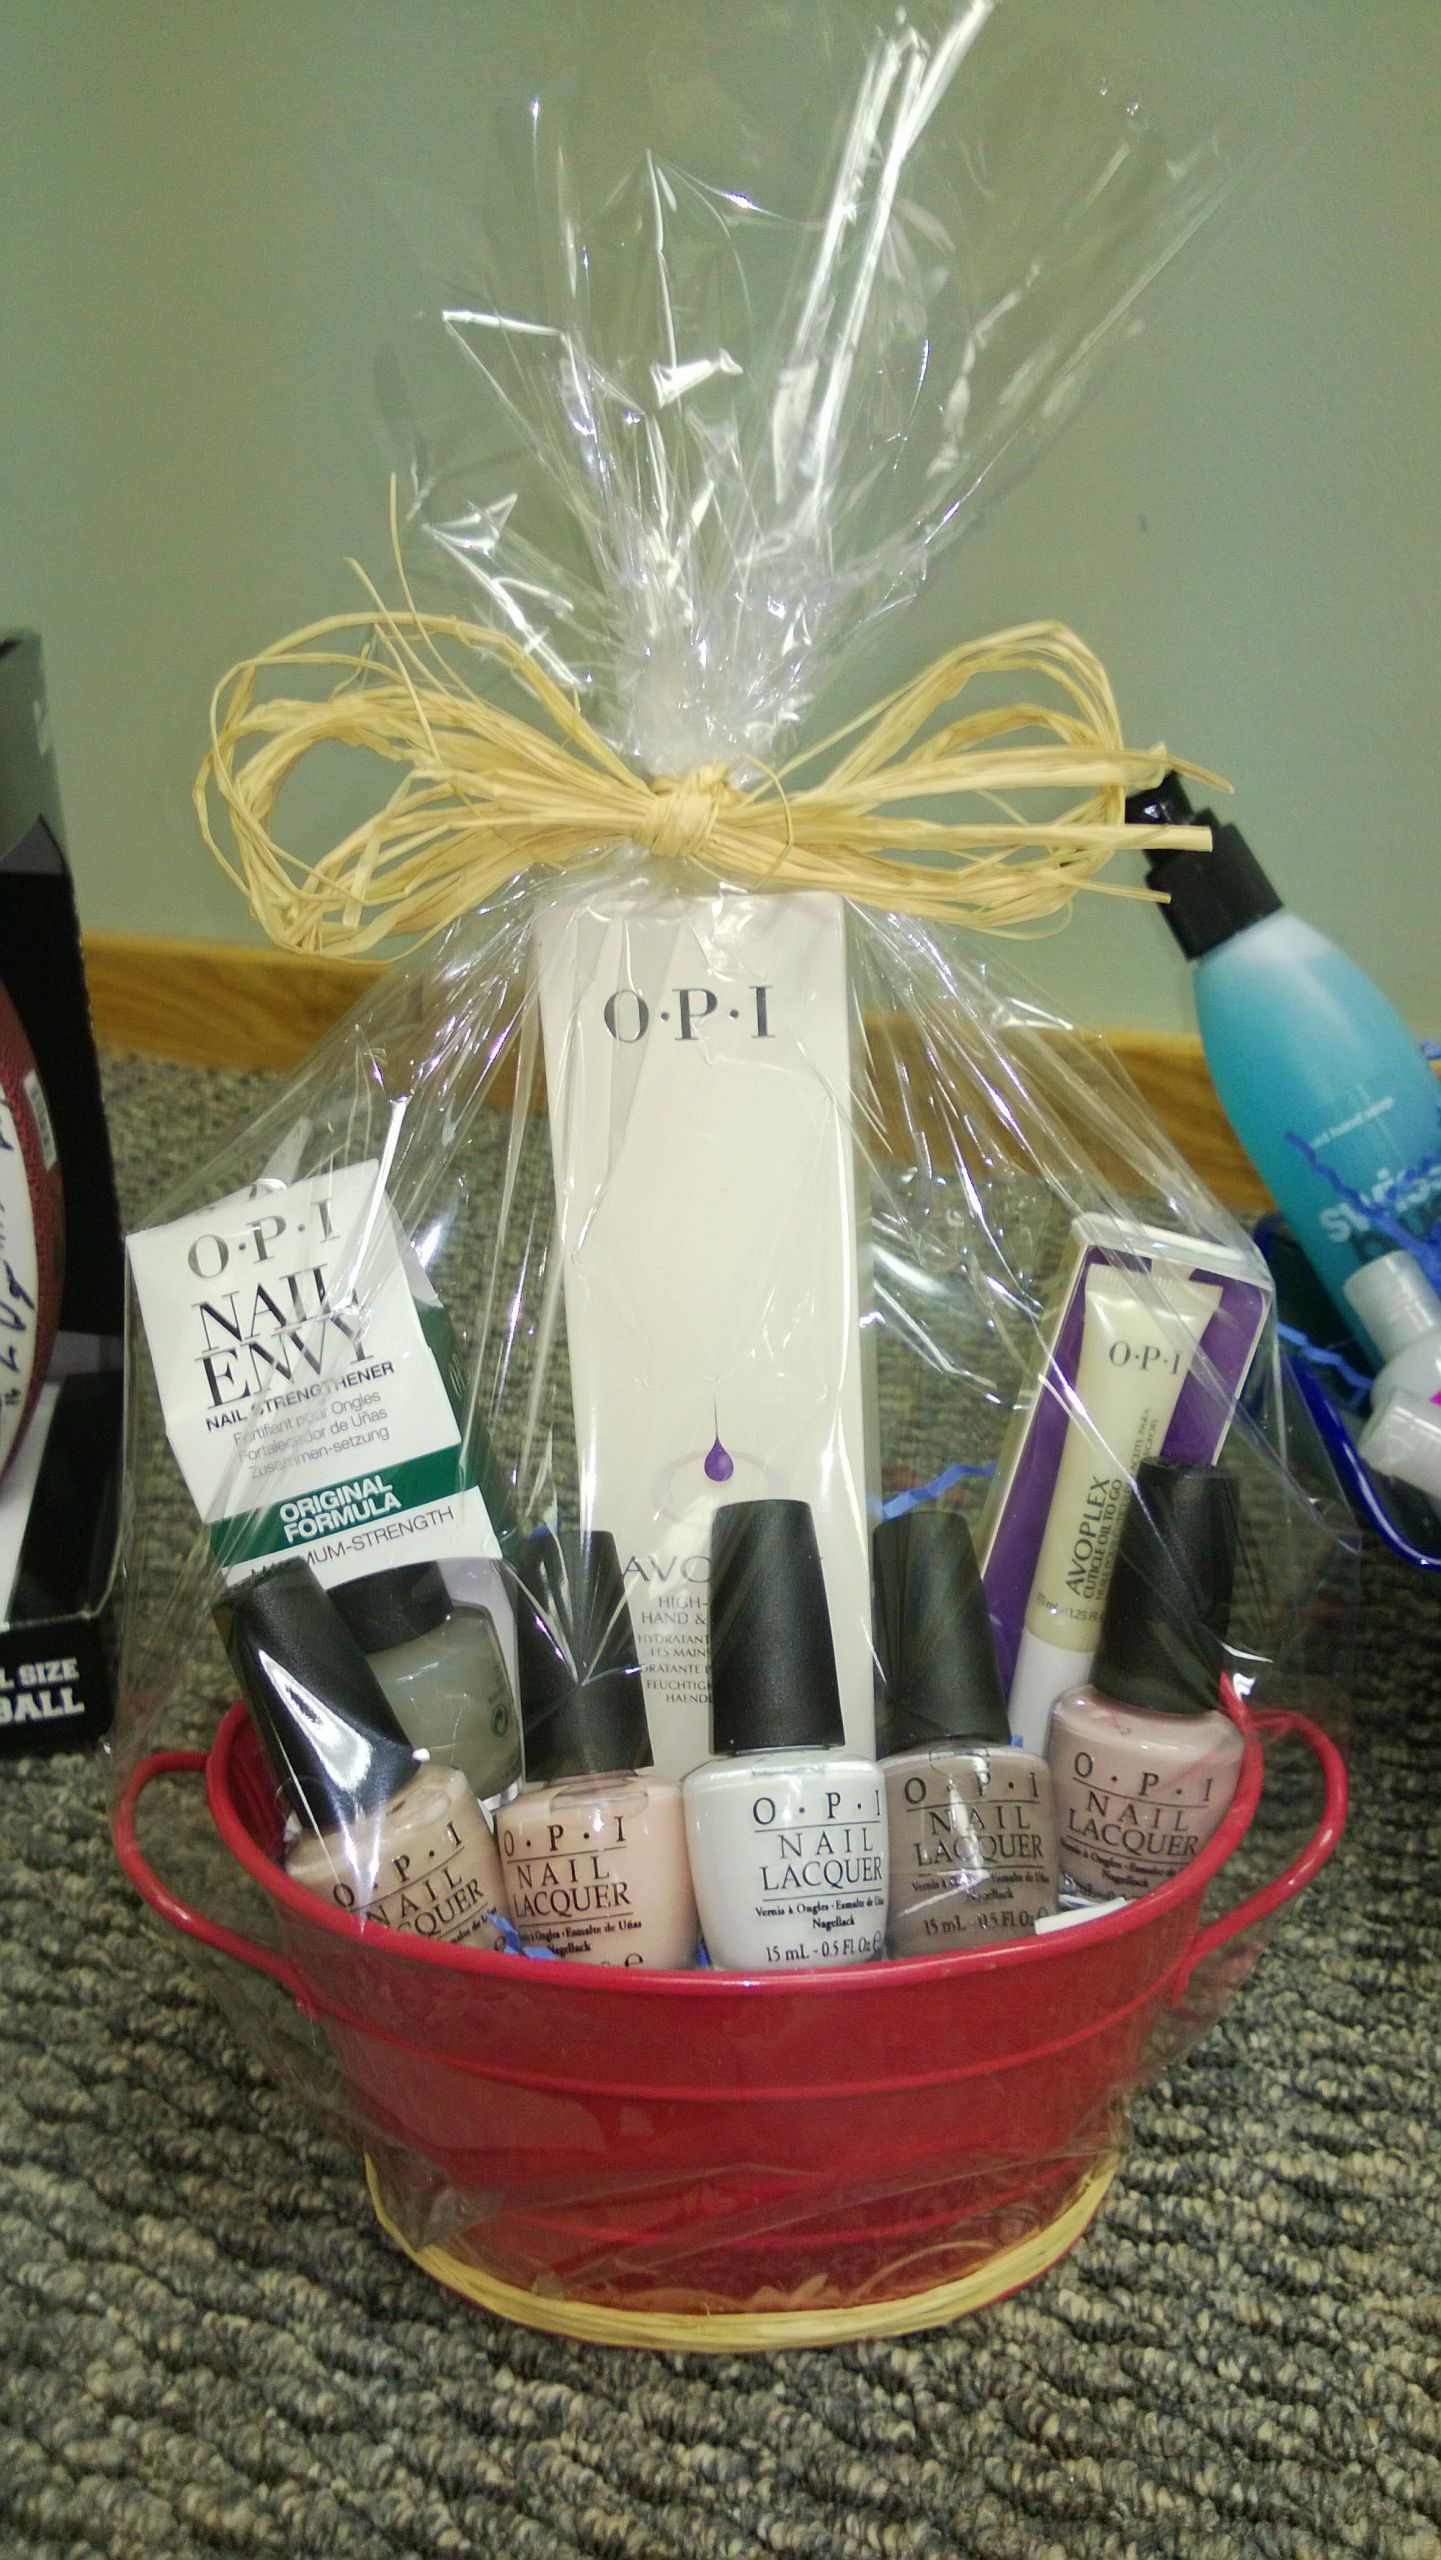 Silent Auction Gift Basket Ideas
 Silent Auction OPI generously donated hundreds in